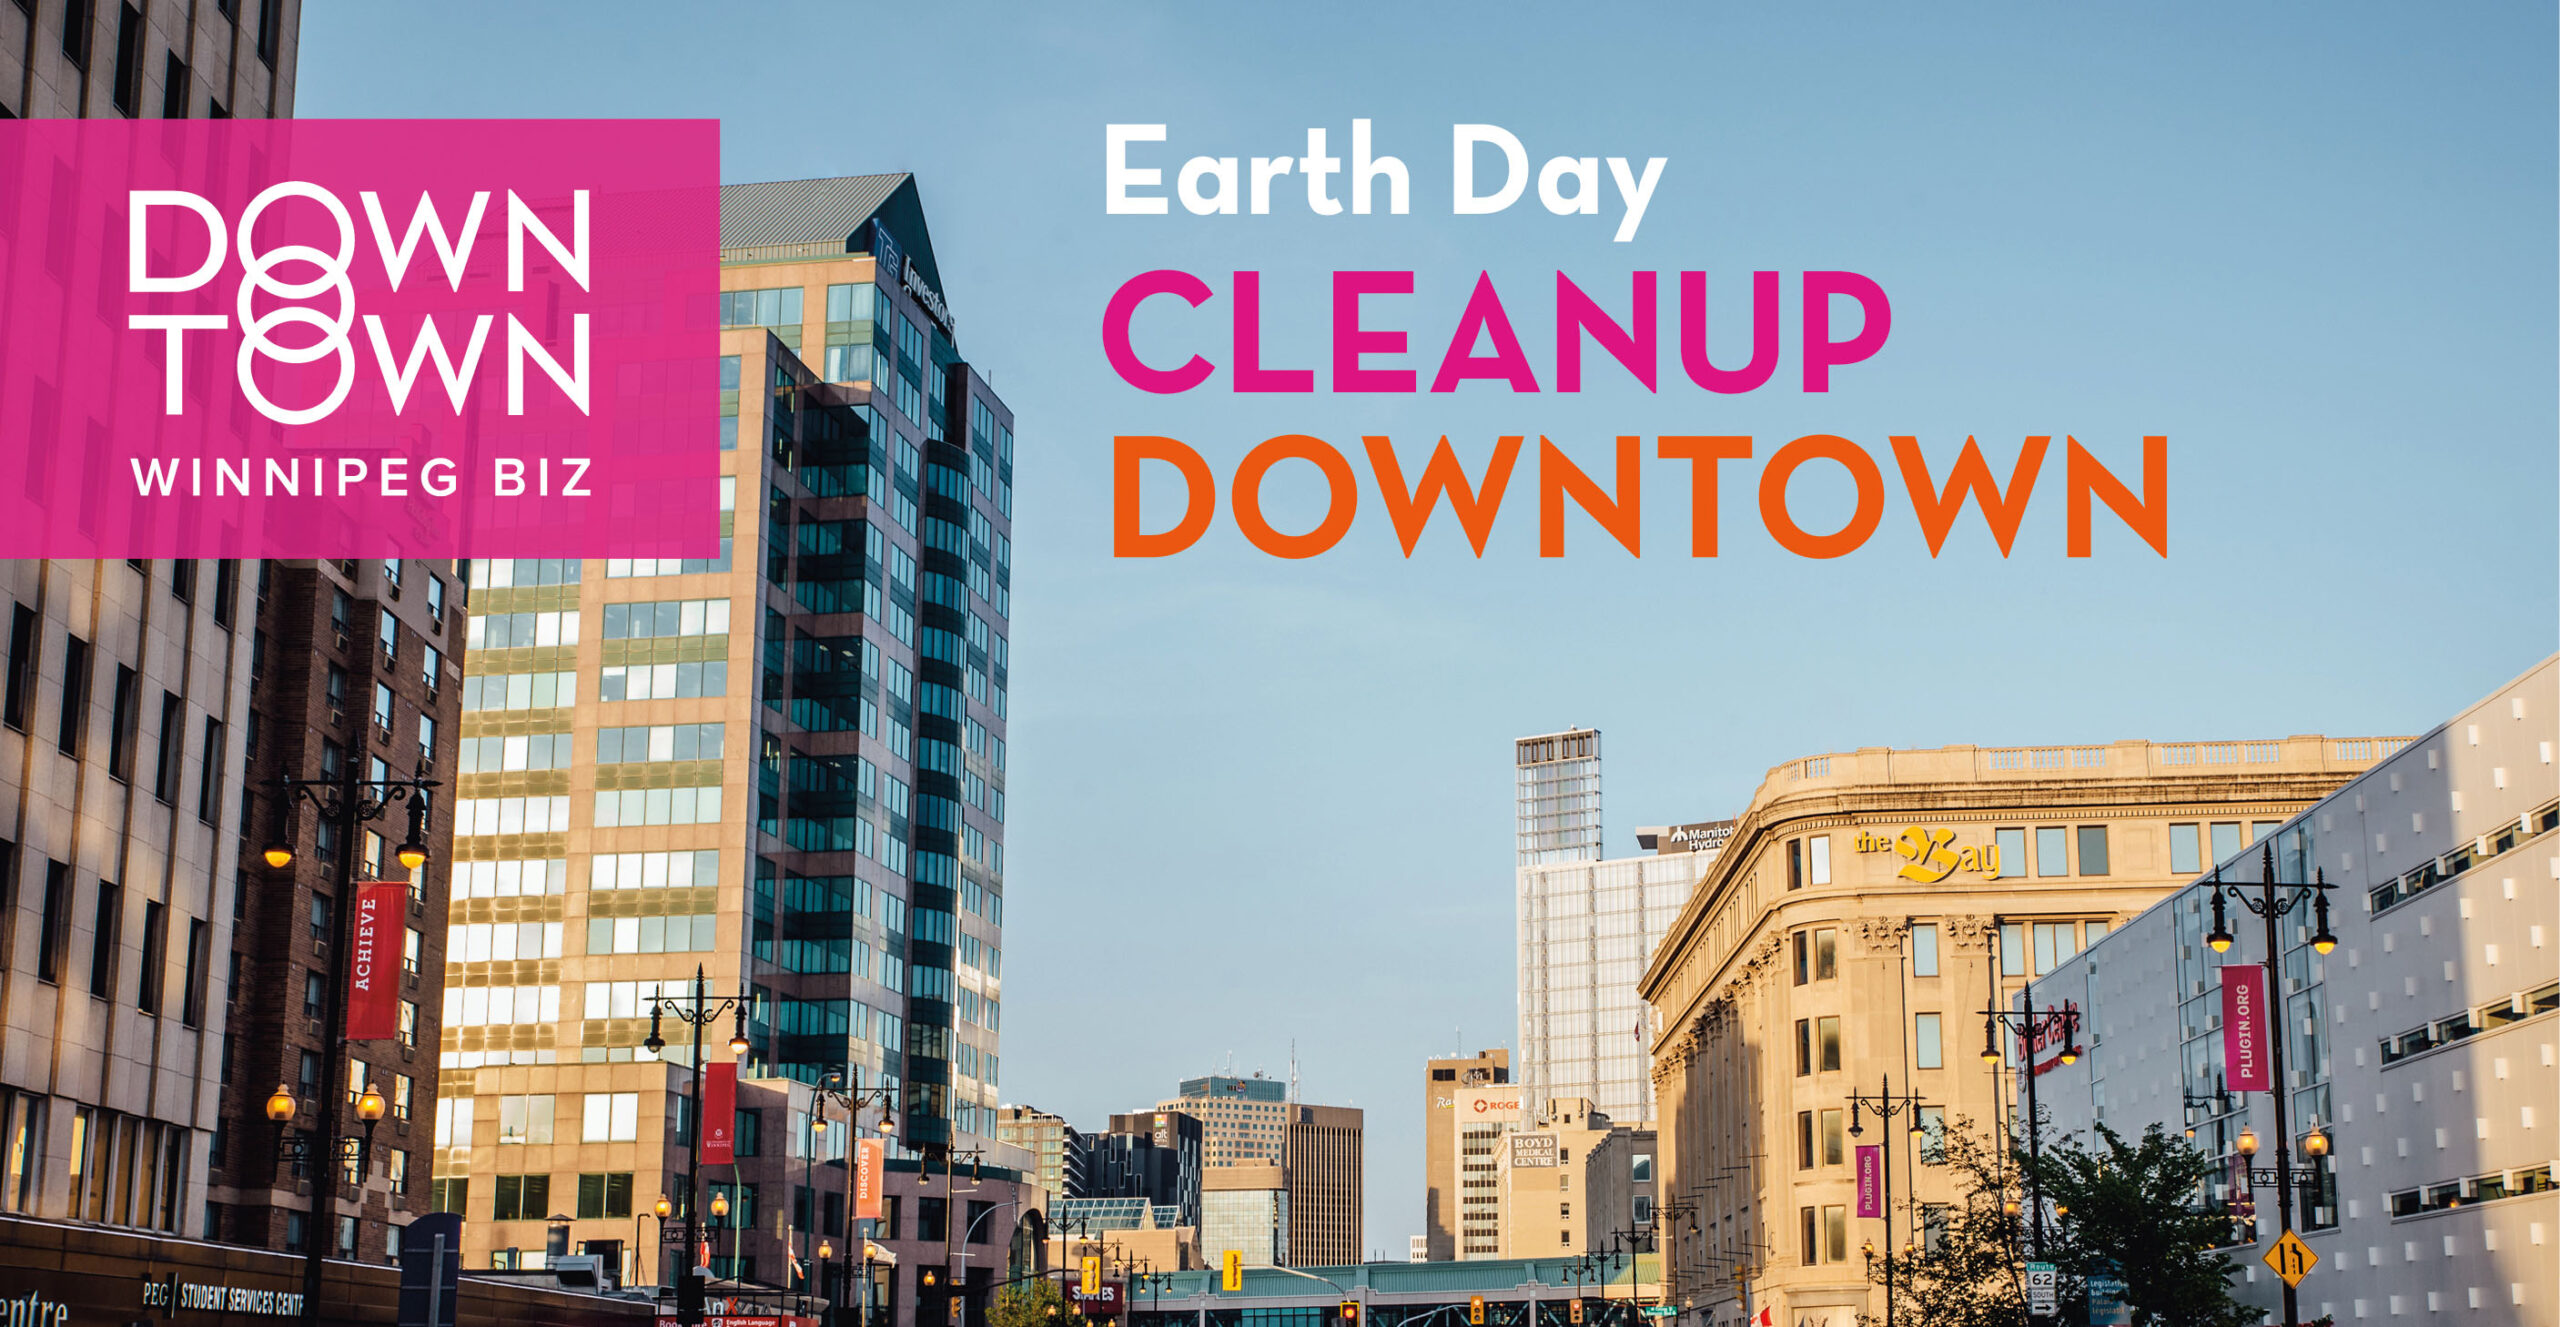 Earth Day CleanUp Downtown